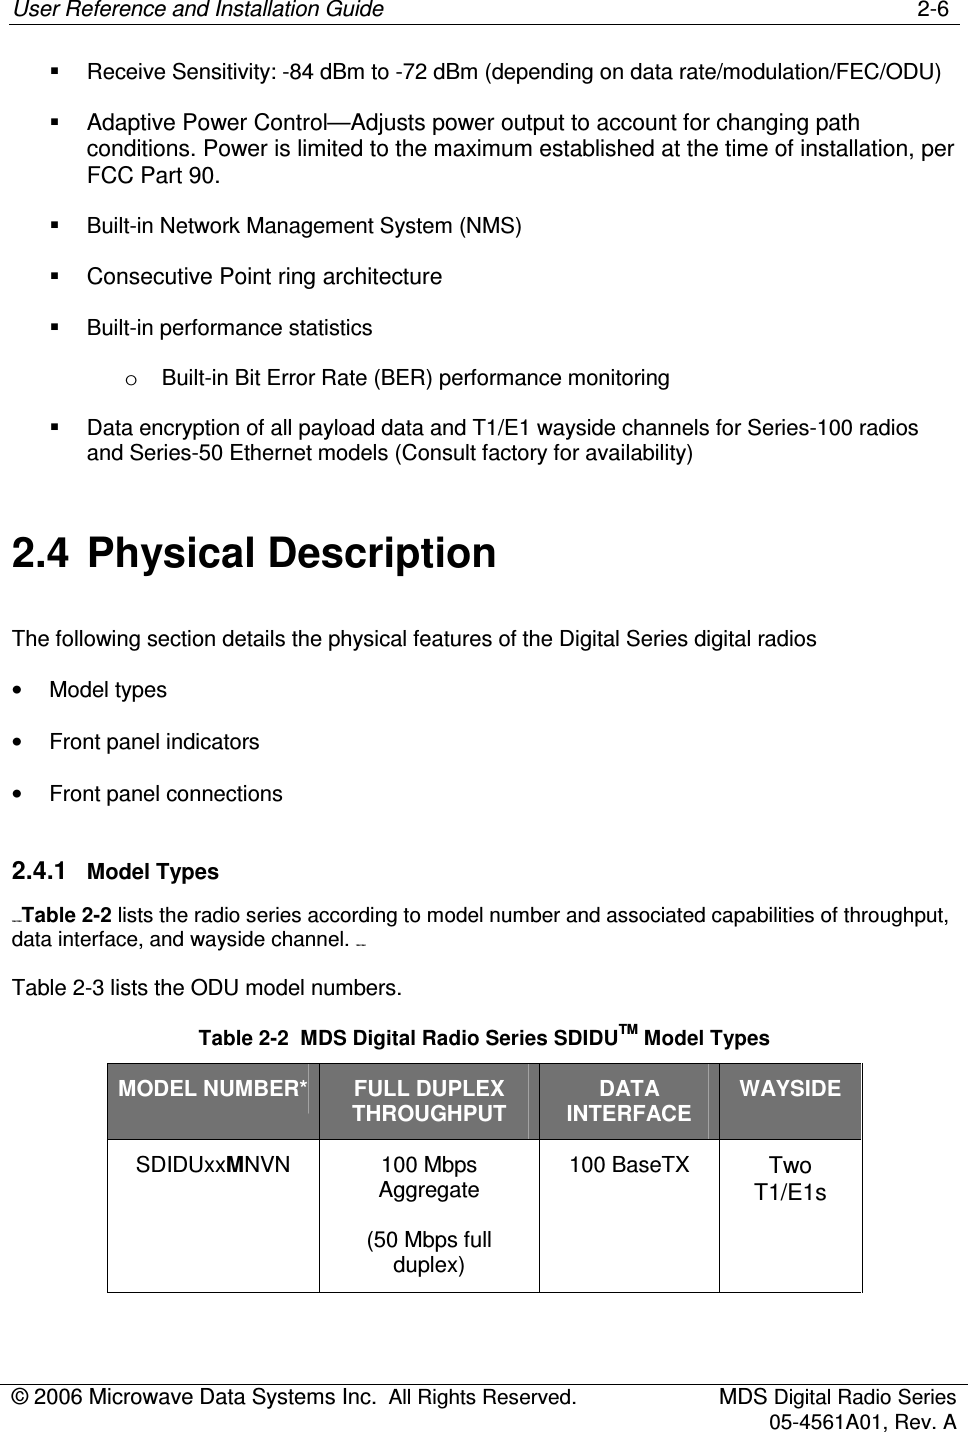 User Reference and Installation Guide    2-6 © 2006 Microwave Data Systems Inc.  All Rights Reserved.  MDS Digital Radio Series 05-4561A01, Rev. A    Receive Sensitivity: -84 dBm to -72 dBm (depending on data rate/modulation/FEC/ODU)   Adaptive Power Control—Adjusts power output to account for changing path conditions. Power is limited to the maximum established at the time of installation, per FCC Part 90.   Built-in Network Management System (NMS)   Consecutive Point ring architecture   Built-in performance statistics o  Built-in Bit Error Rate (BER) performance monitoring   Data encryption of all payload data and T1/E1 wayside channels for Series-100 radios and Series-50 Ethernet models (Consult factory for availability)  2.4  Physical Description The following section details the physical features of the Digital Series digital radios •  Model types •  Front panel indicators •  Front panel connections 2.4.1  Model Types 158H155HTable 2-2 lists the radio series according to model number and associated capabilities of throughput, data interface, and wayside channel. 159H 156H Table 2-3 lists the ODU model numbers. Table 2-2  MDS Digital Radio Series SDIDUTM Model Types MODEL NUMBER* FULL DUPLEX THROUGHPUT DATA INTERFACE WAYSIDE SDIDUxxMNVN   100 Mbps Aggregate (50 Mbps full duplex) 100 BaseTX Two T1/E1s 